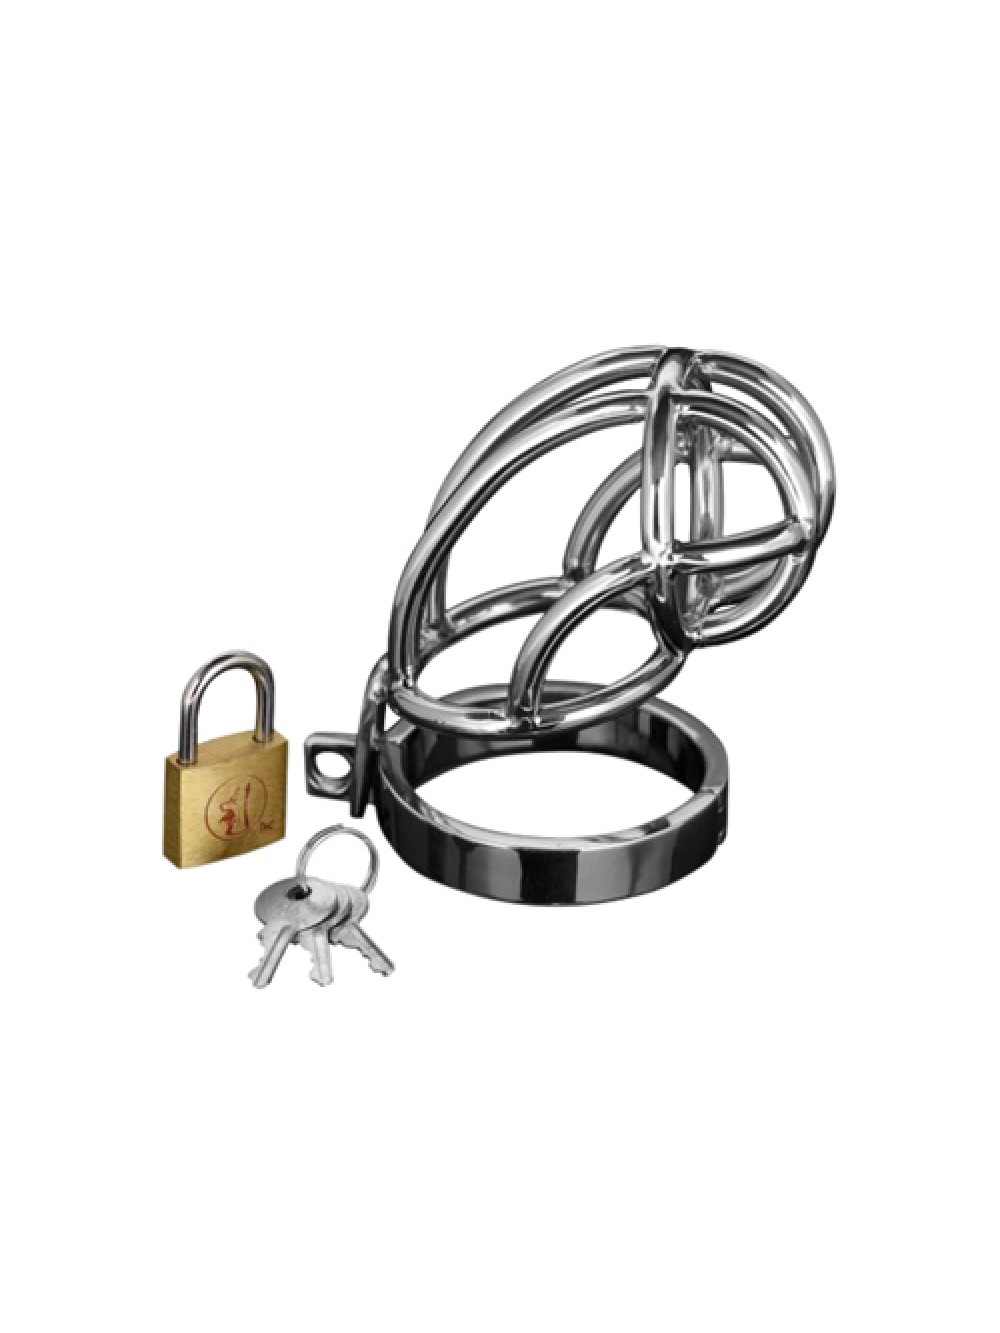 Captus Stainless Steel Locking Chastity Cage 848518005694